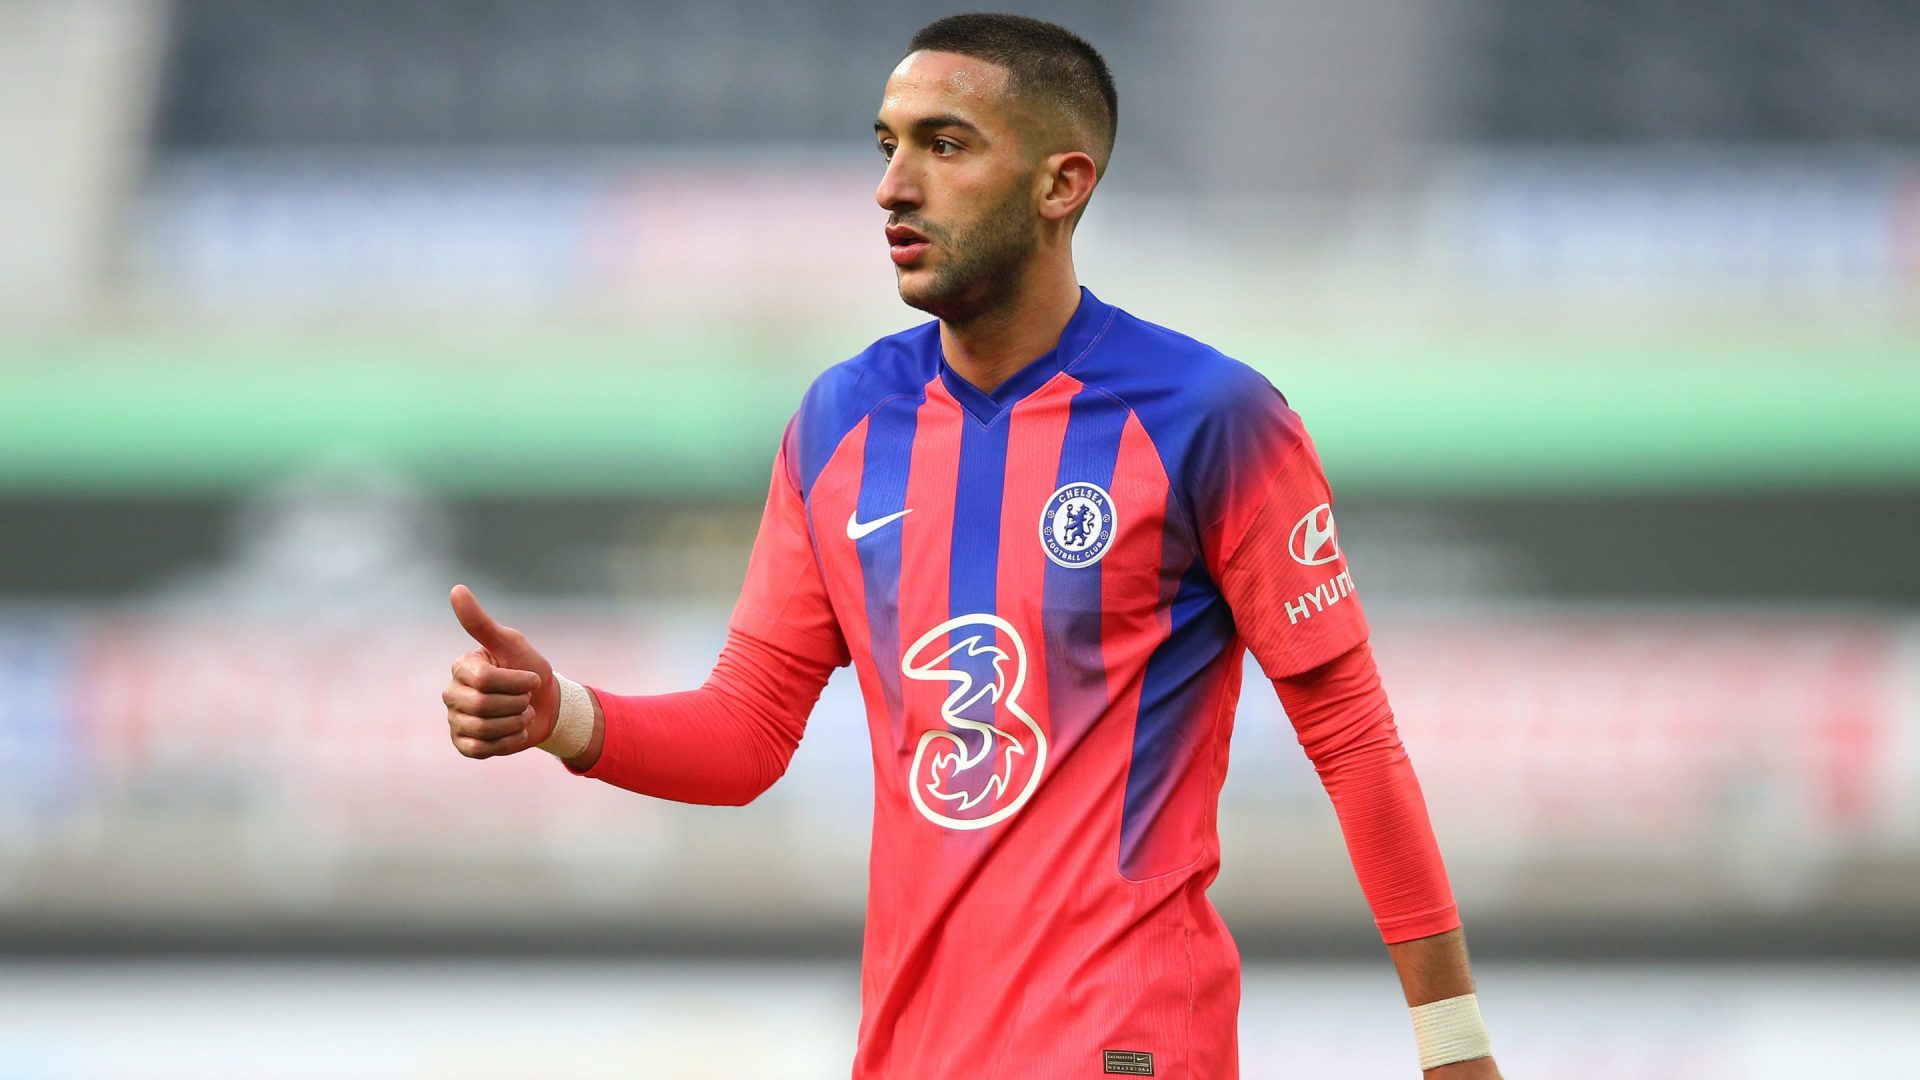 Hakim Ziyech can also very smartly be struggling, but there is no potential he’s leaving Chelsea moral yet